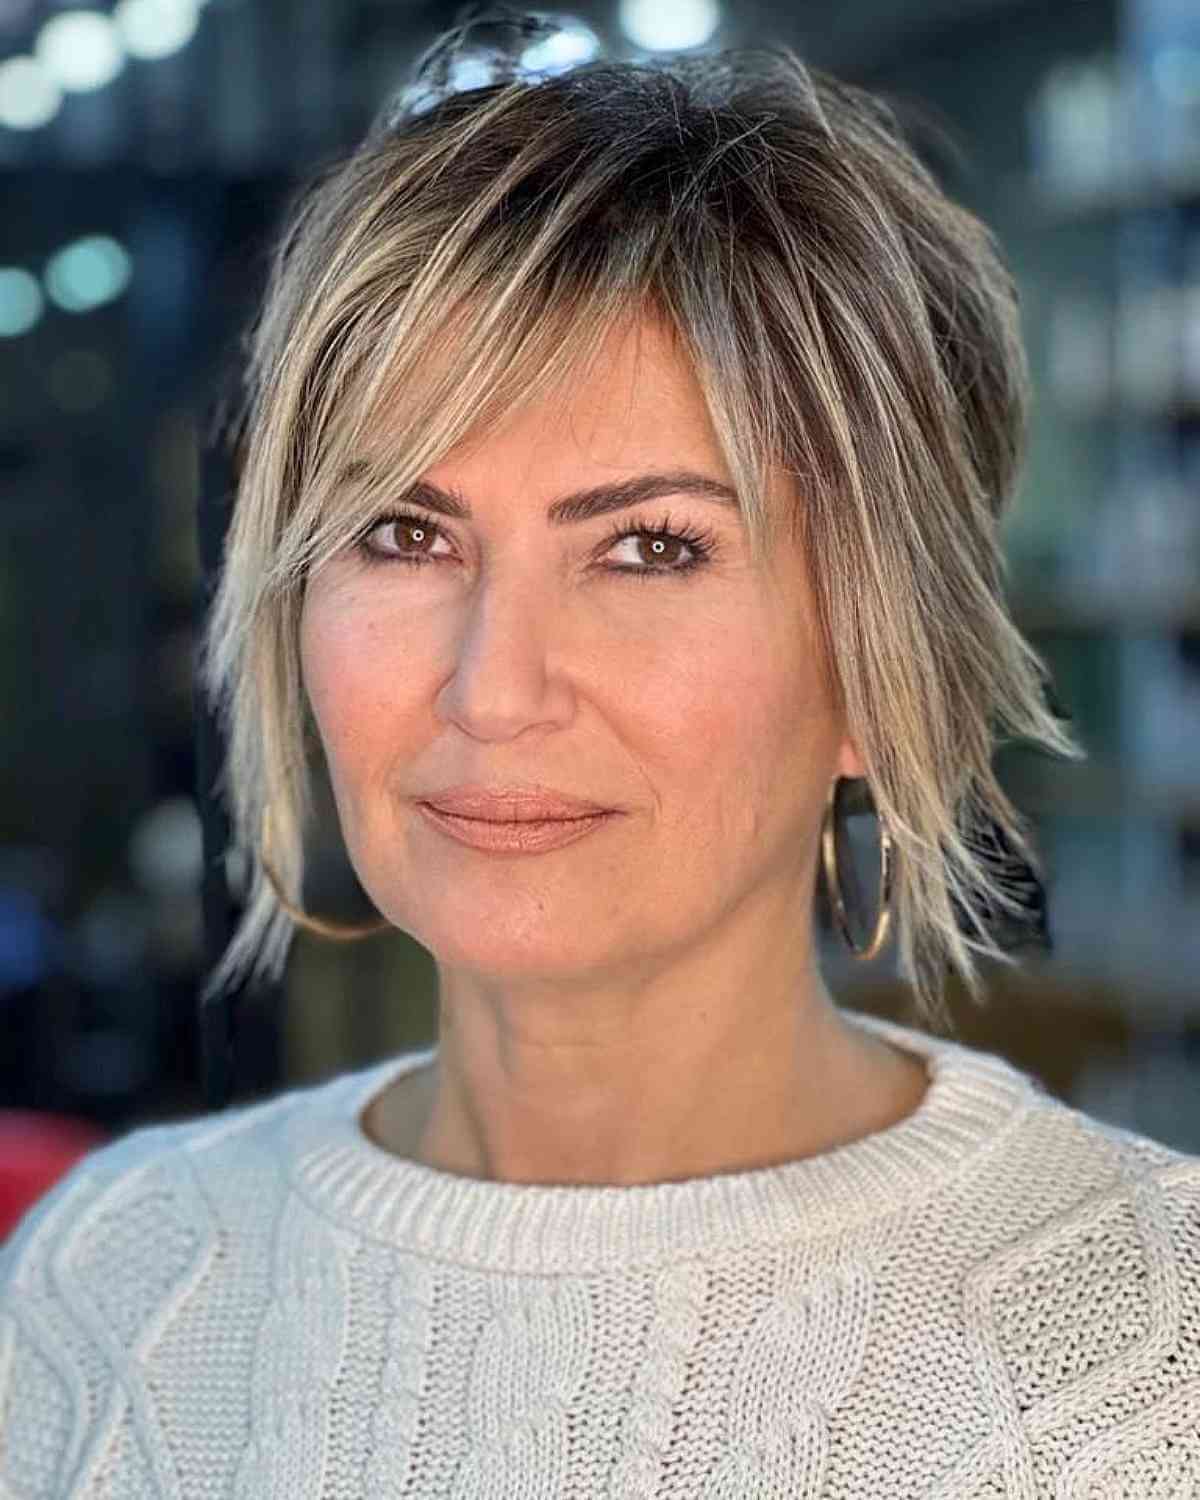 21 Modern Shaggy Hairstyles for Women Over 50 with Fine Hair